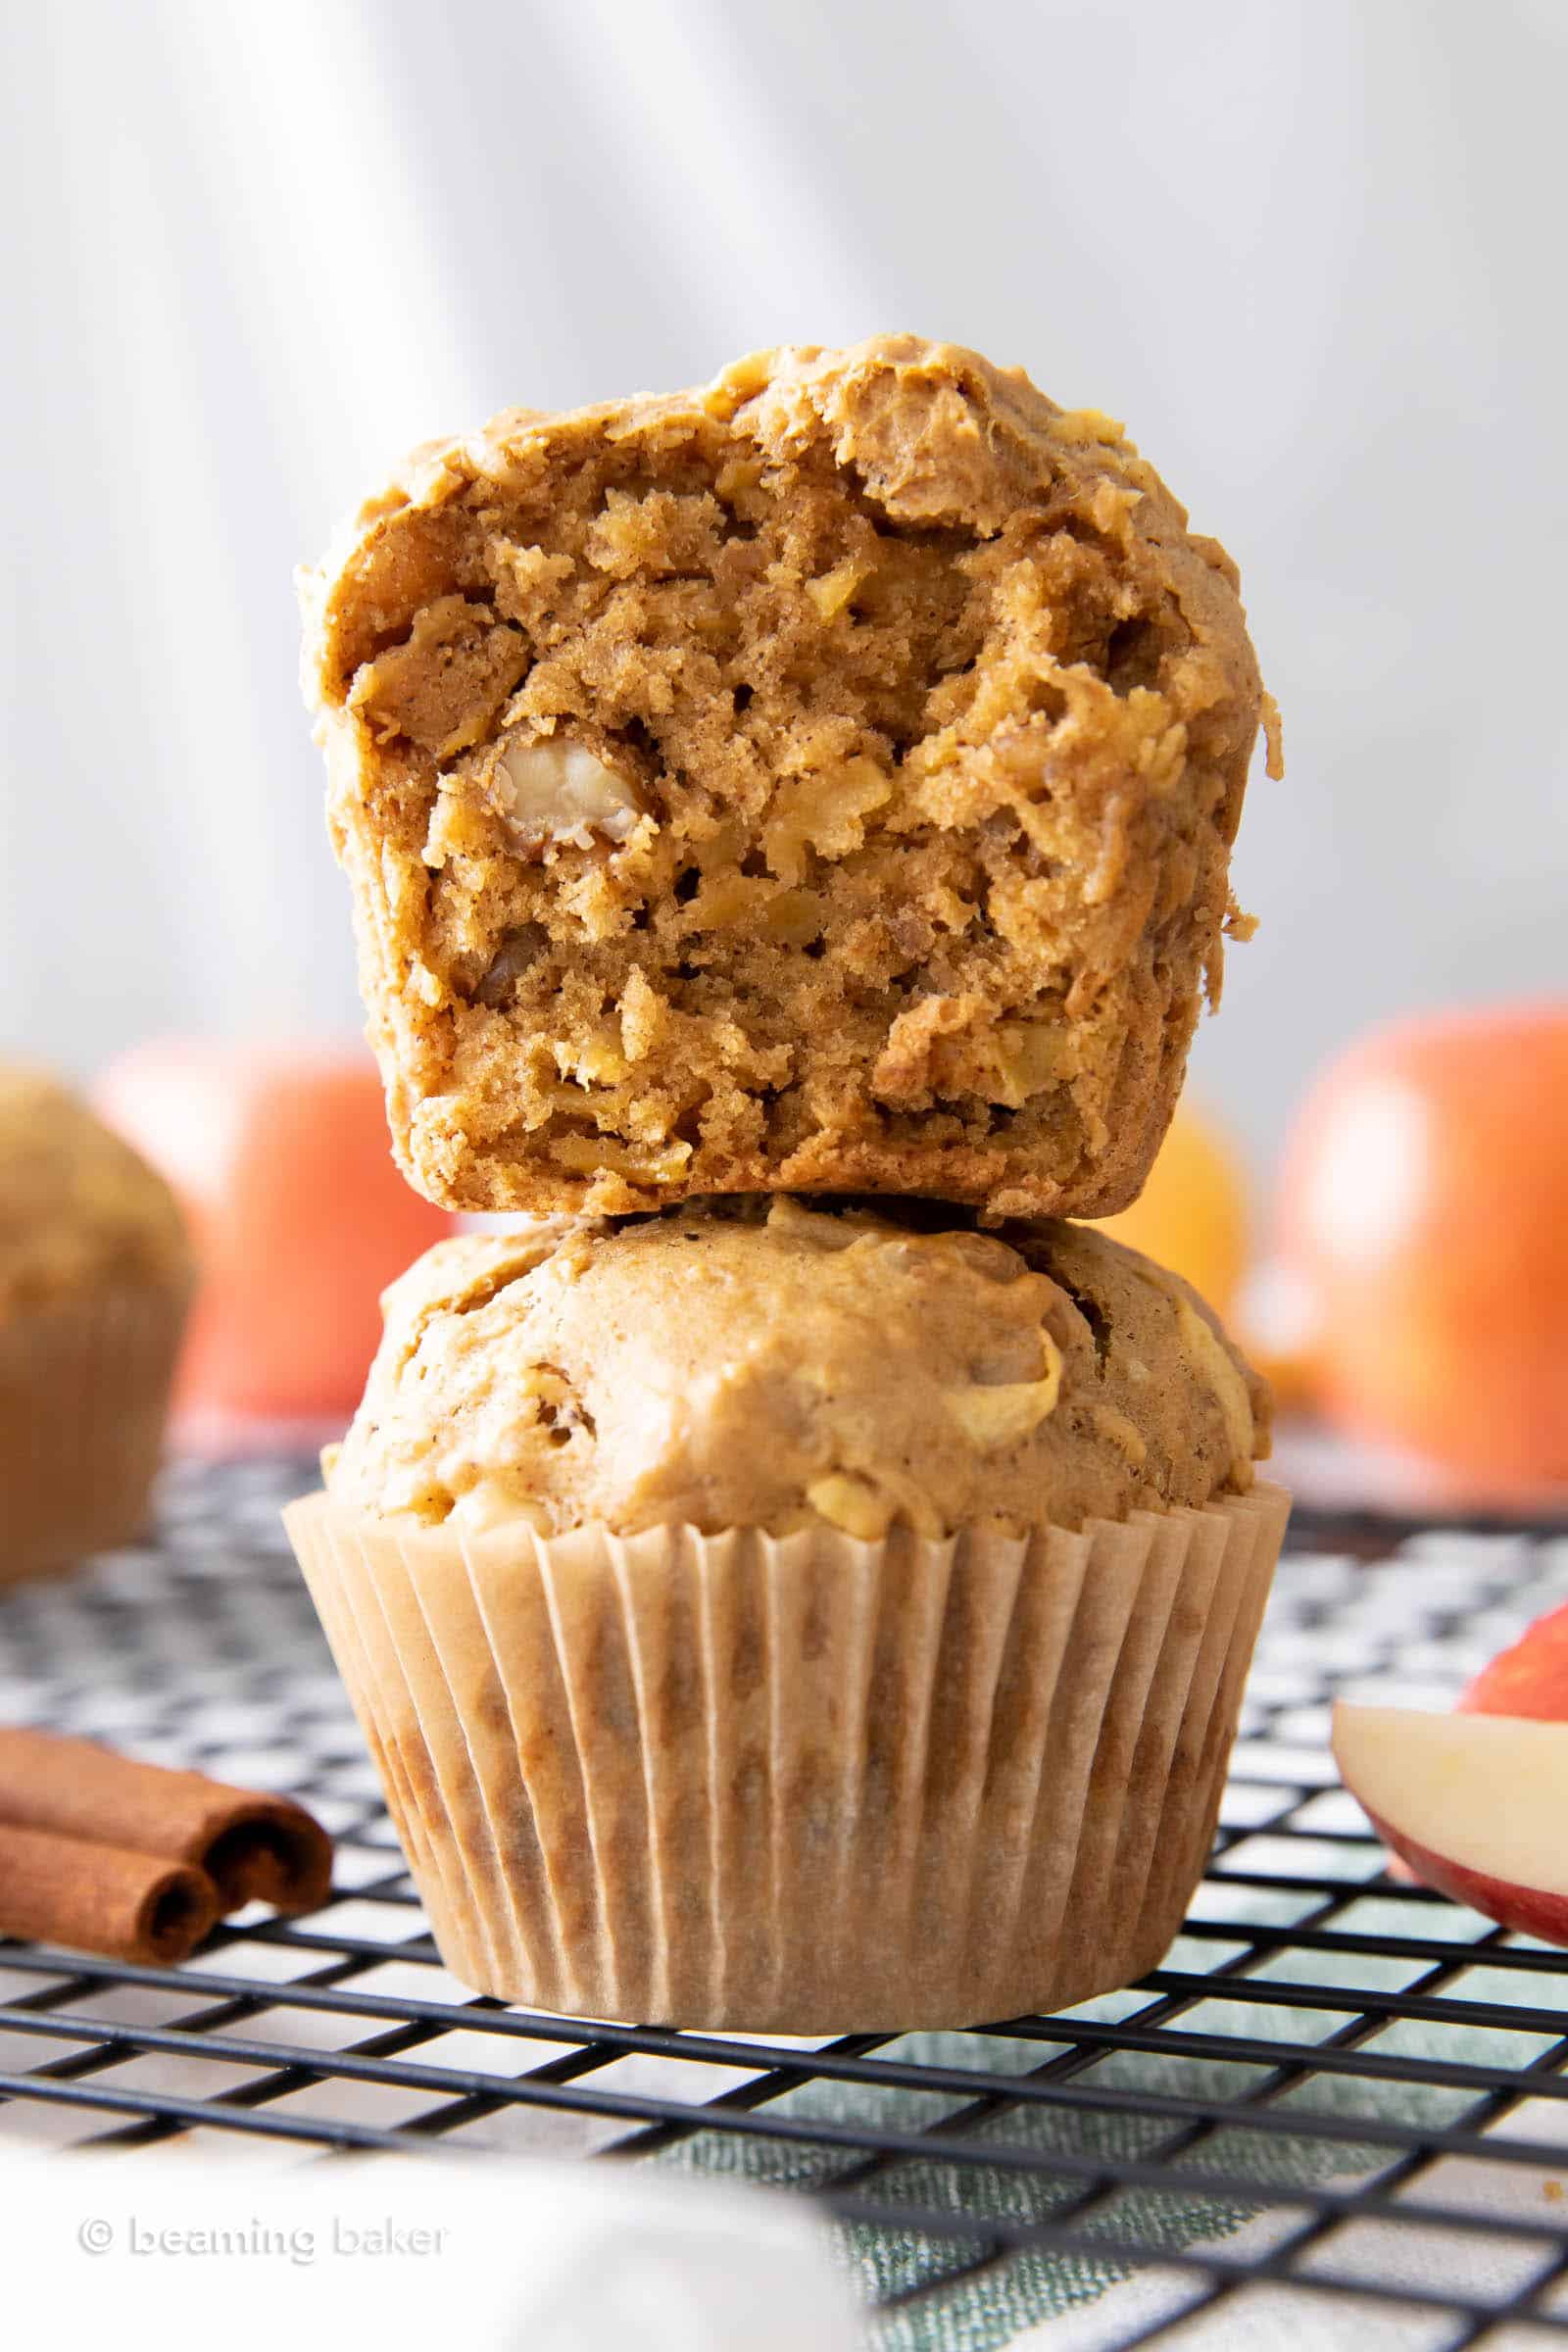 Stack of two vegan apple muffins, one half muffin on top of a full muffin